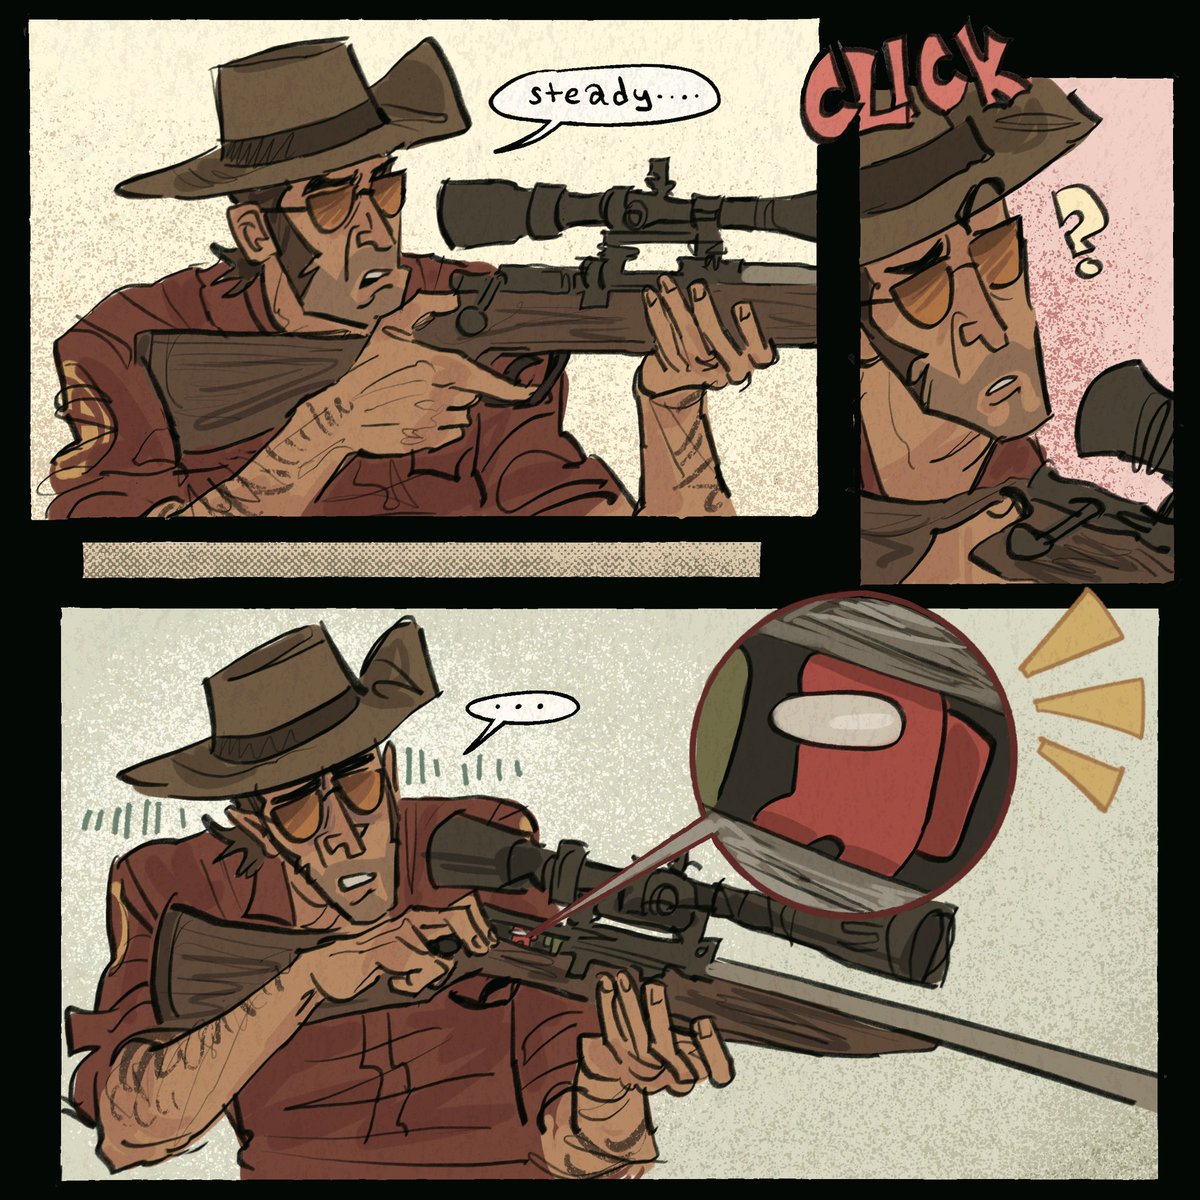 kofi request: “I would like sniper tf2 trying to load his sniper rifle but finding that instead of bullets, he has the tiniest amongi in his ammo spot, thank you” #tf2